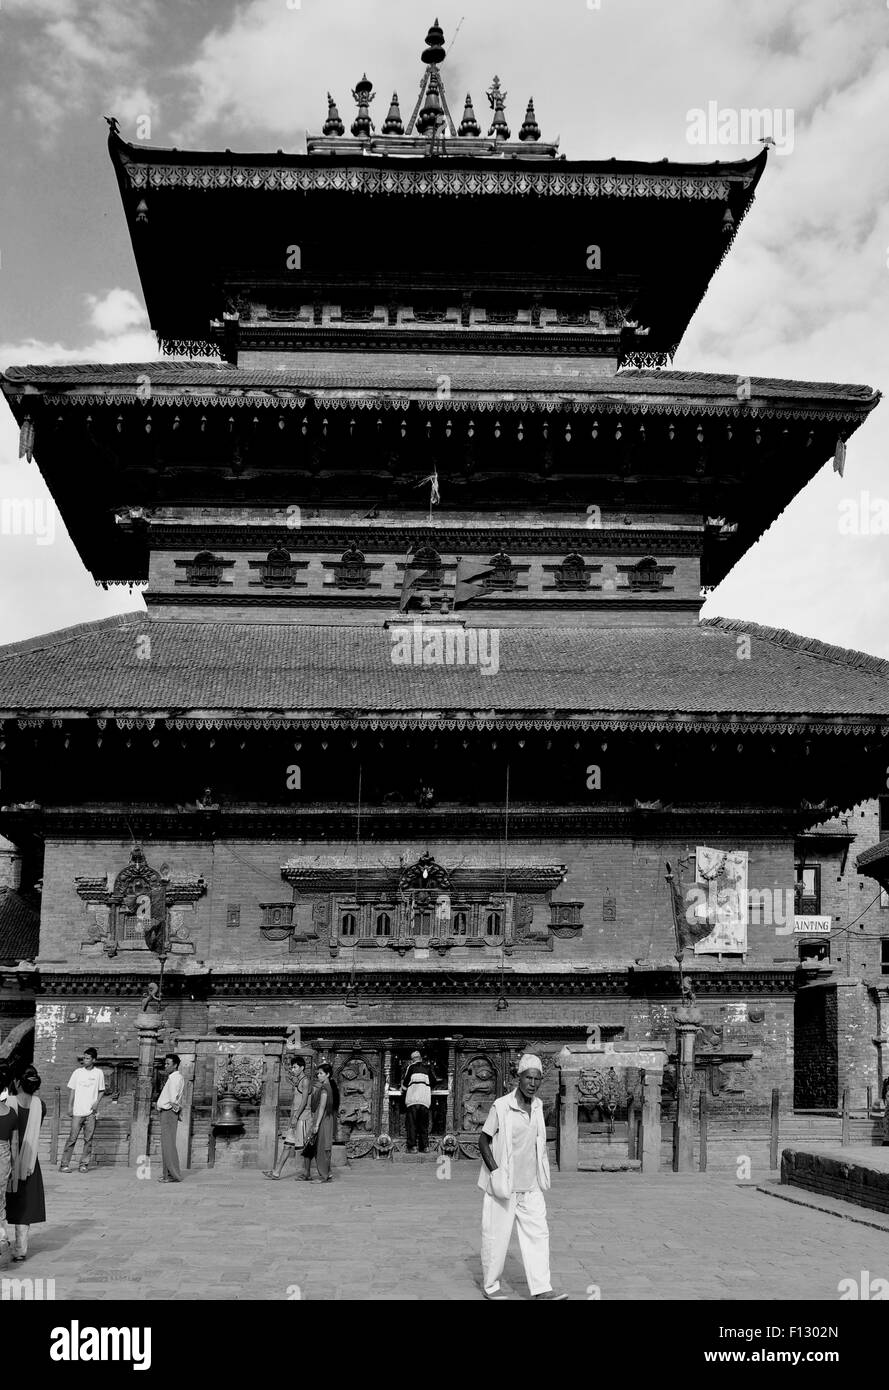 Art in architecture - a unique cultural monument in one of the heritage temple complexes on the outskirts of Kathmandu, Nepal Stock Photo